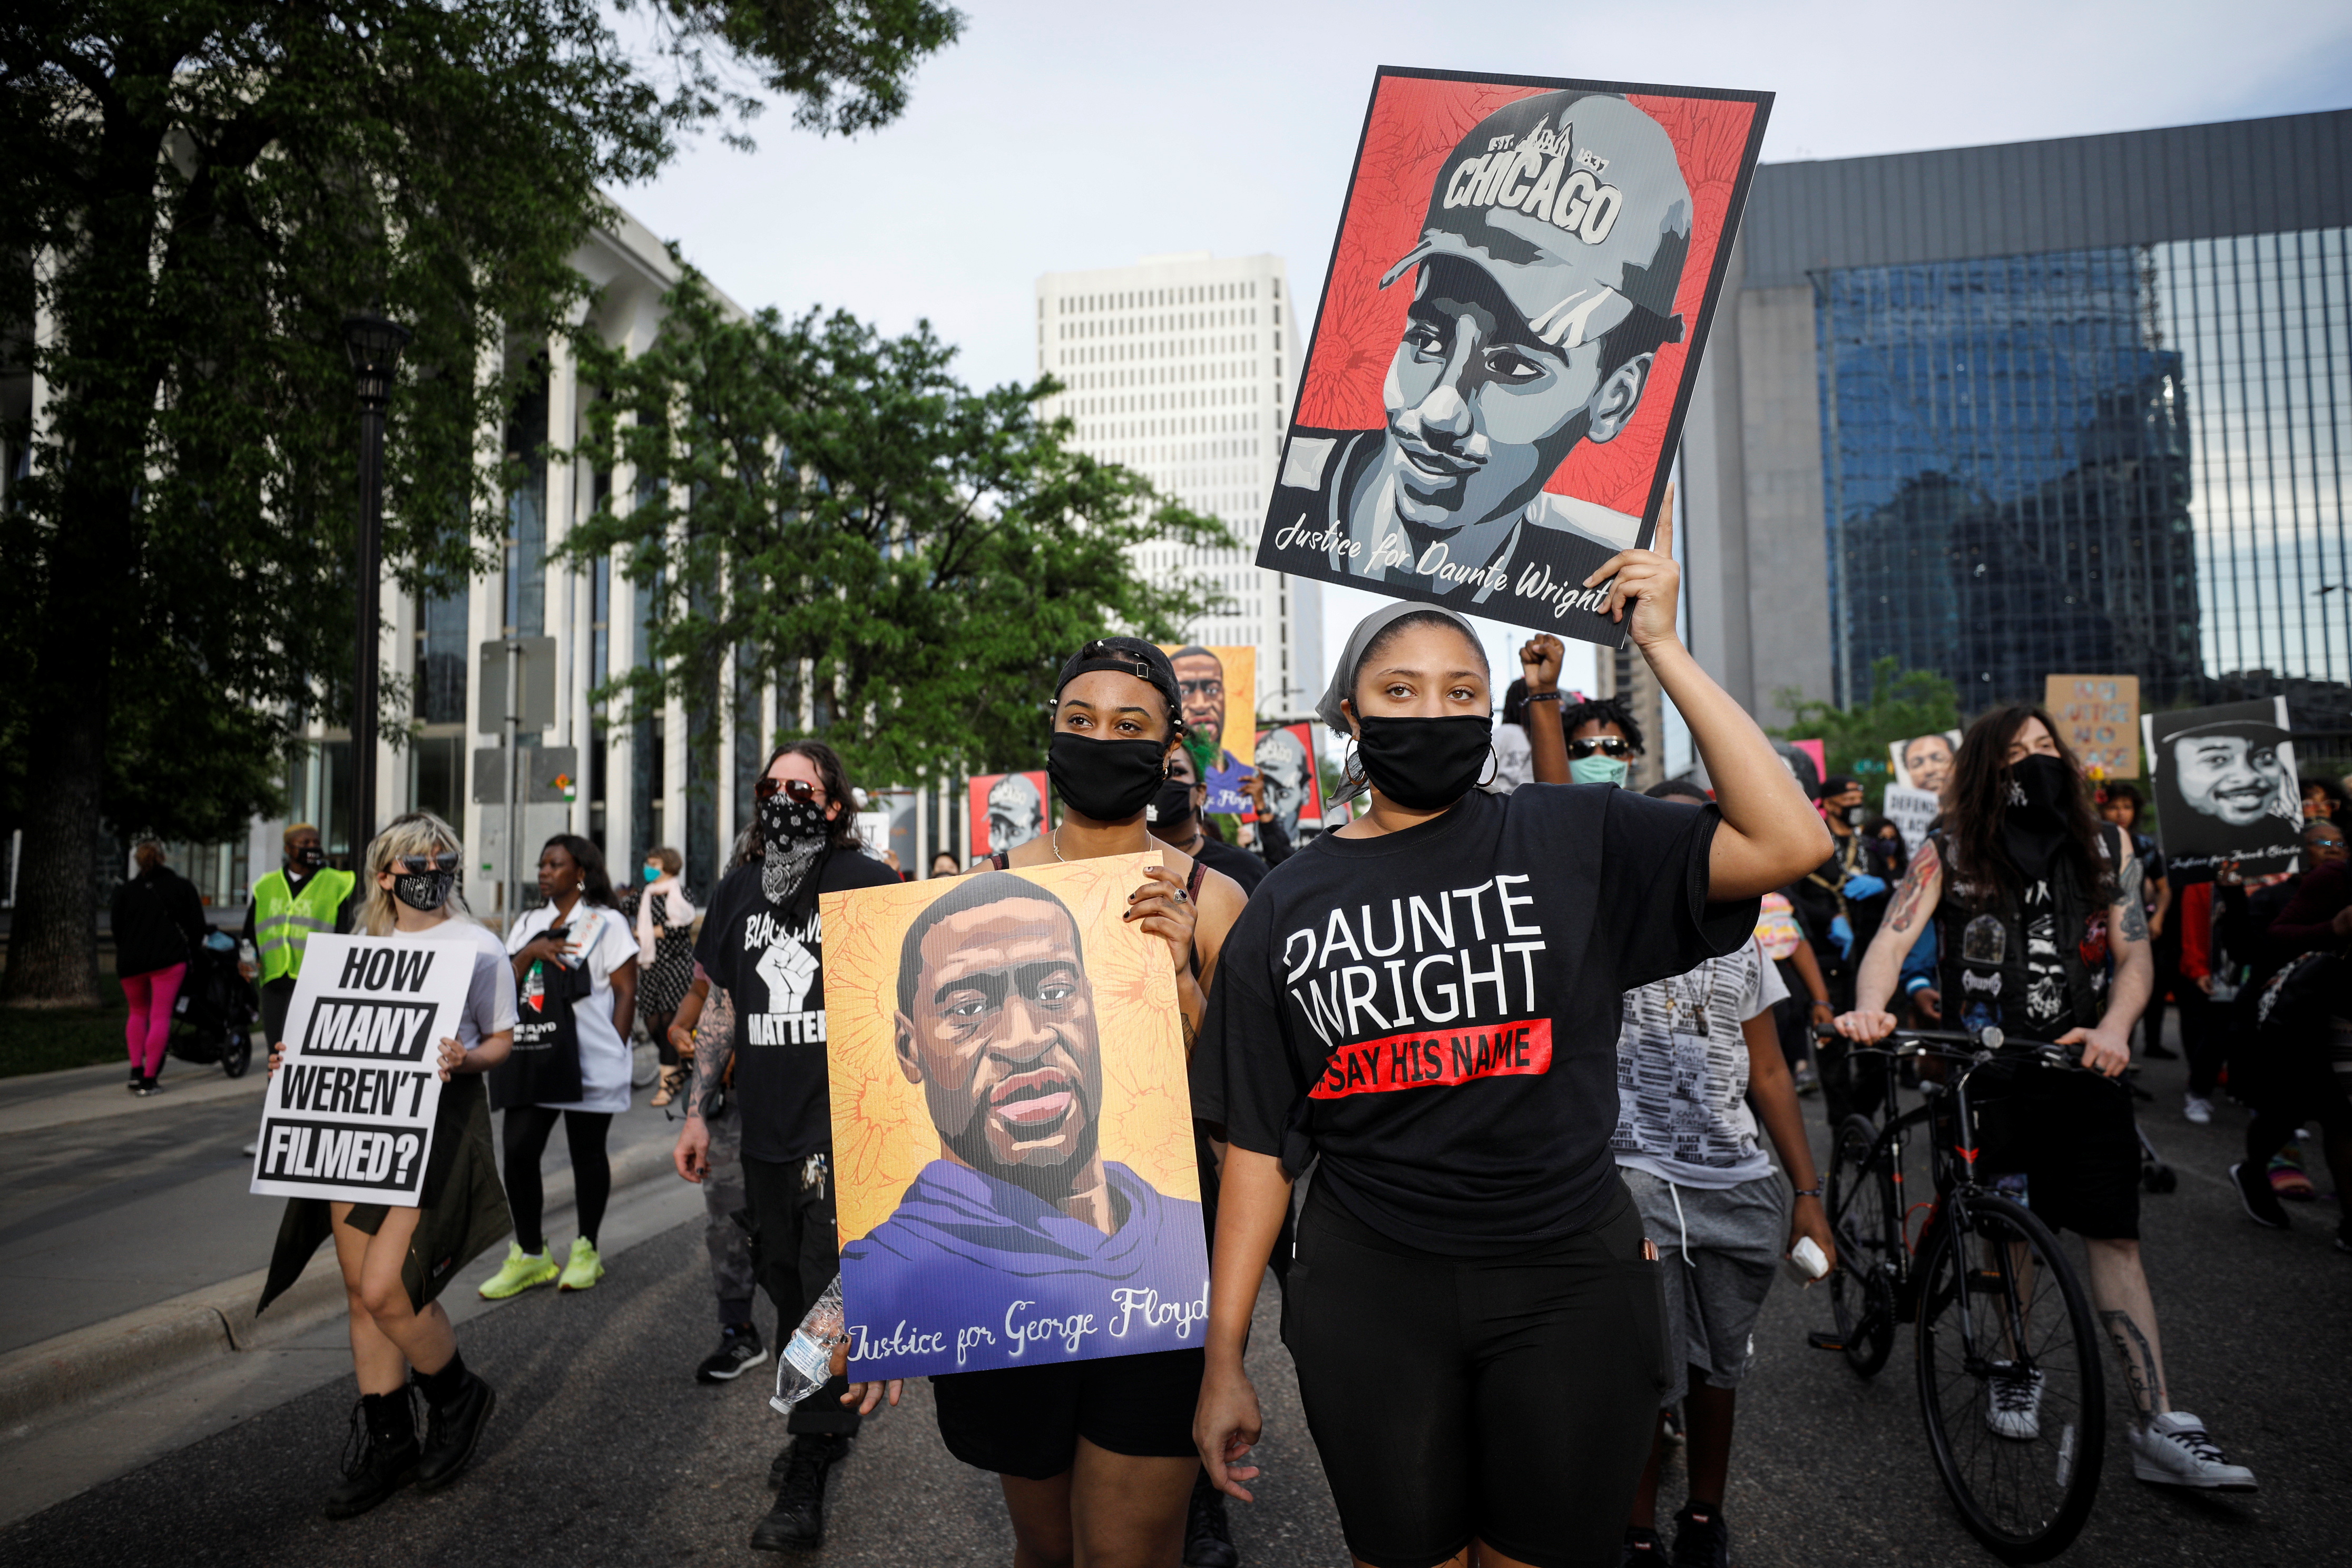 People march during the "One Year, What's Changed?" rally hosted by the George Floyd Global Memorial to commemorate the first anniversary of his death, in Minneapolis, Minnesota, U.S. May 23, 2021. REUTERS/Nicholas Pfosi